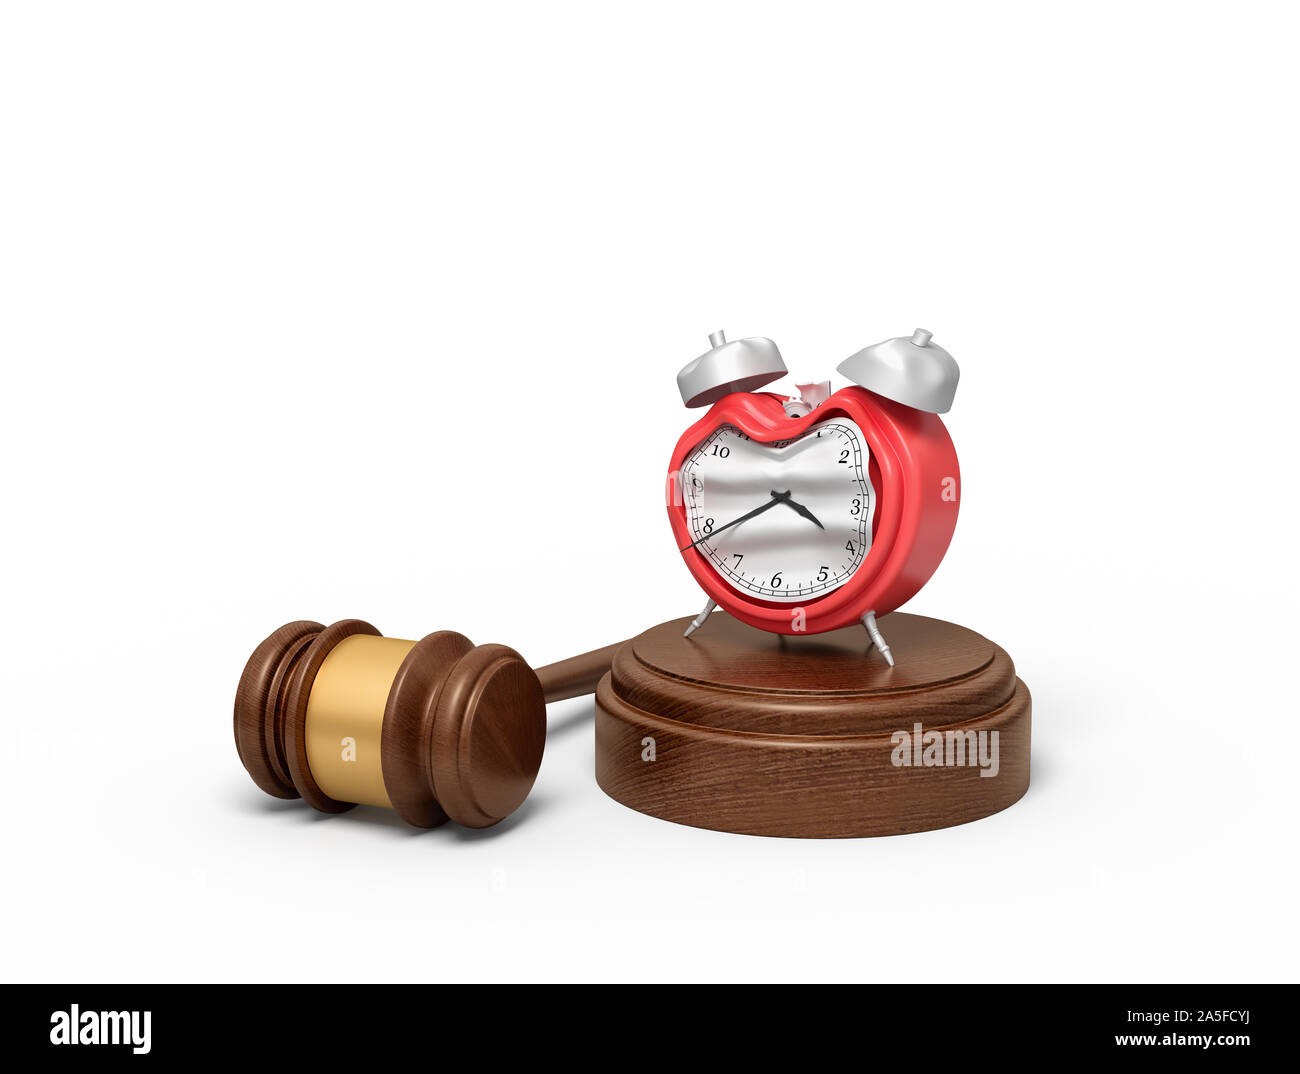 3d rendering of smashed broken alarn clock on round wooden block and brown wooden gavel Stock Photo